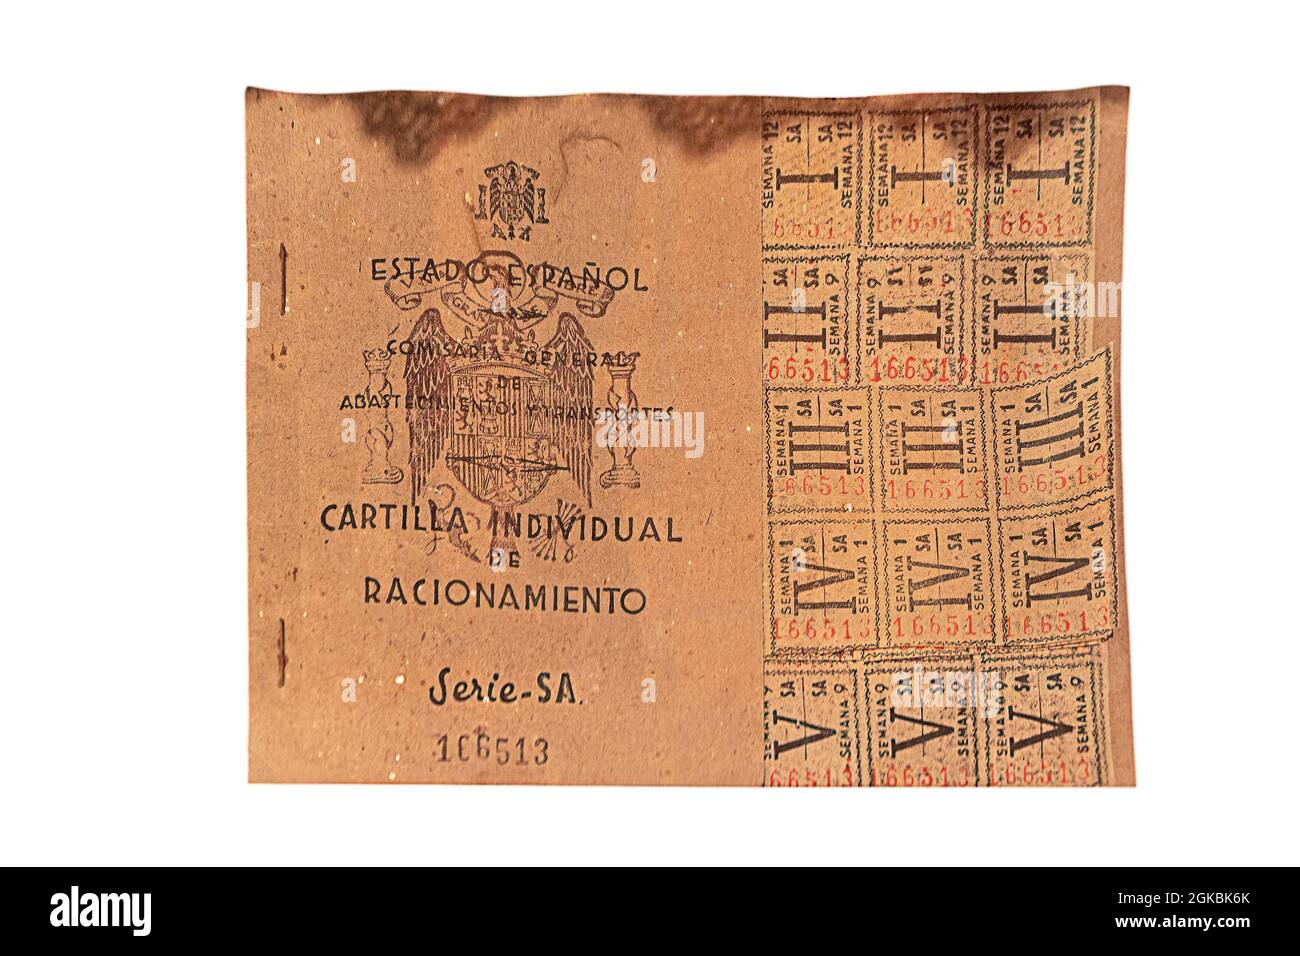 Salamanca, Spain - October 10, 2017: Spanish ration card with coupons valid from 1939 to 1952 during the Spanish civil war.Photography made on white b Stock Photo